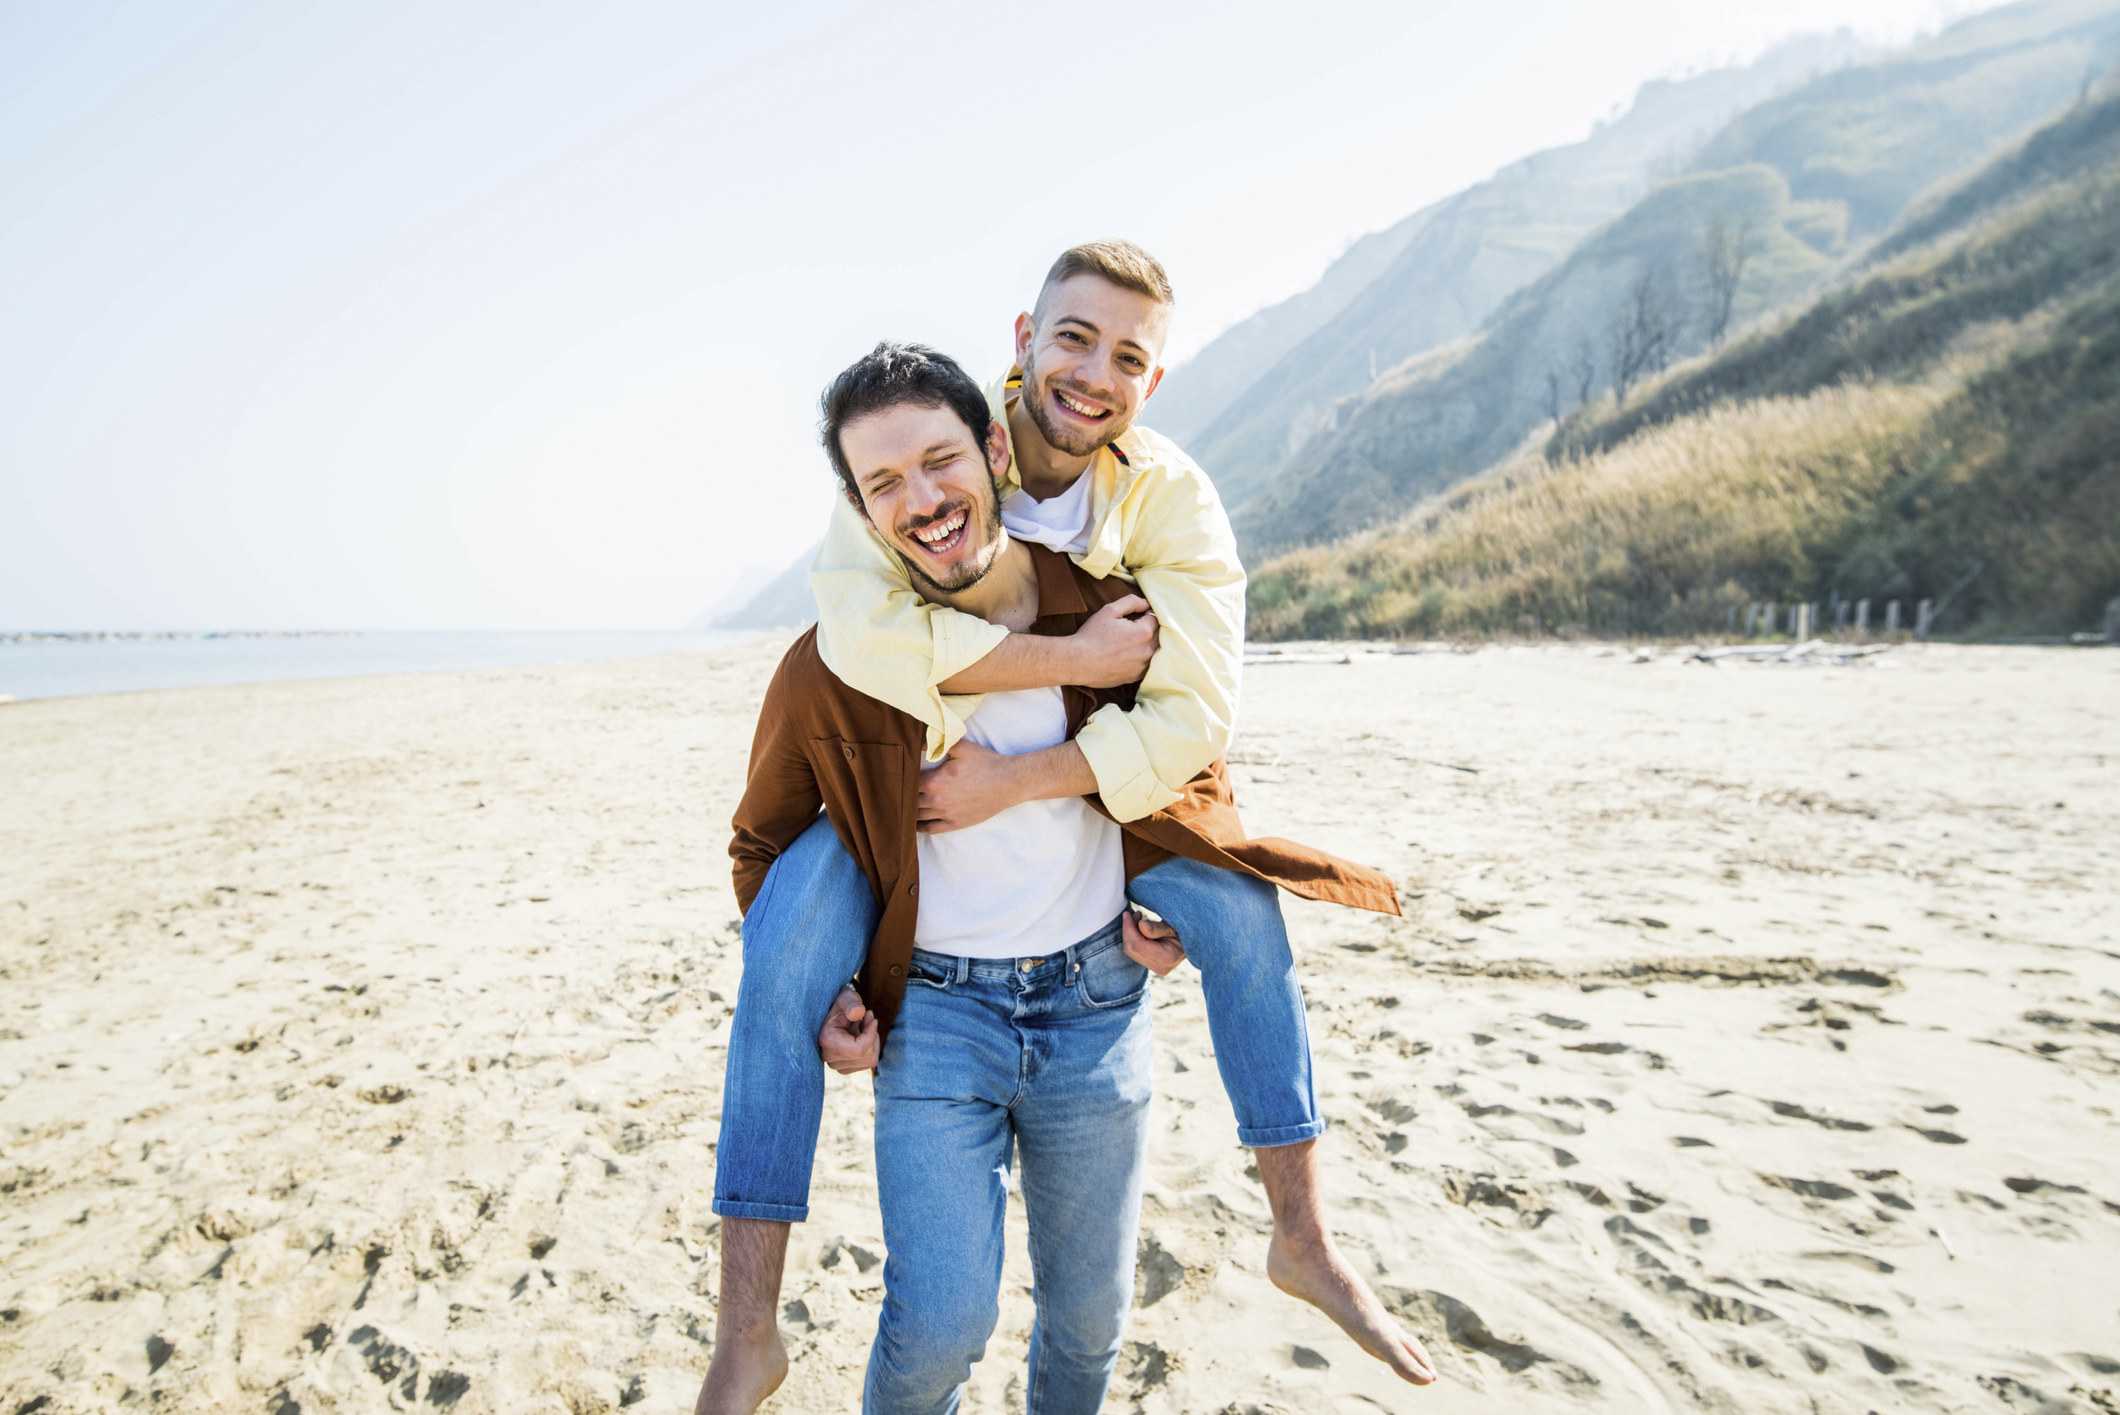 Gay couple laugh on the beach as one man gives the other a piggy-back